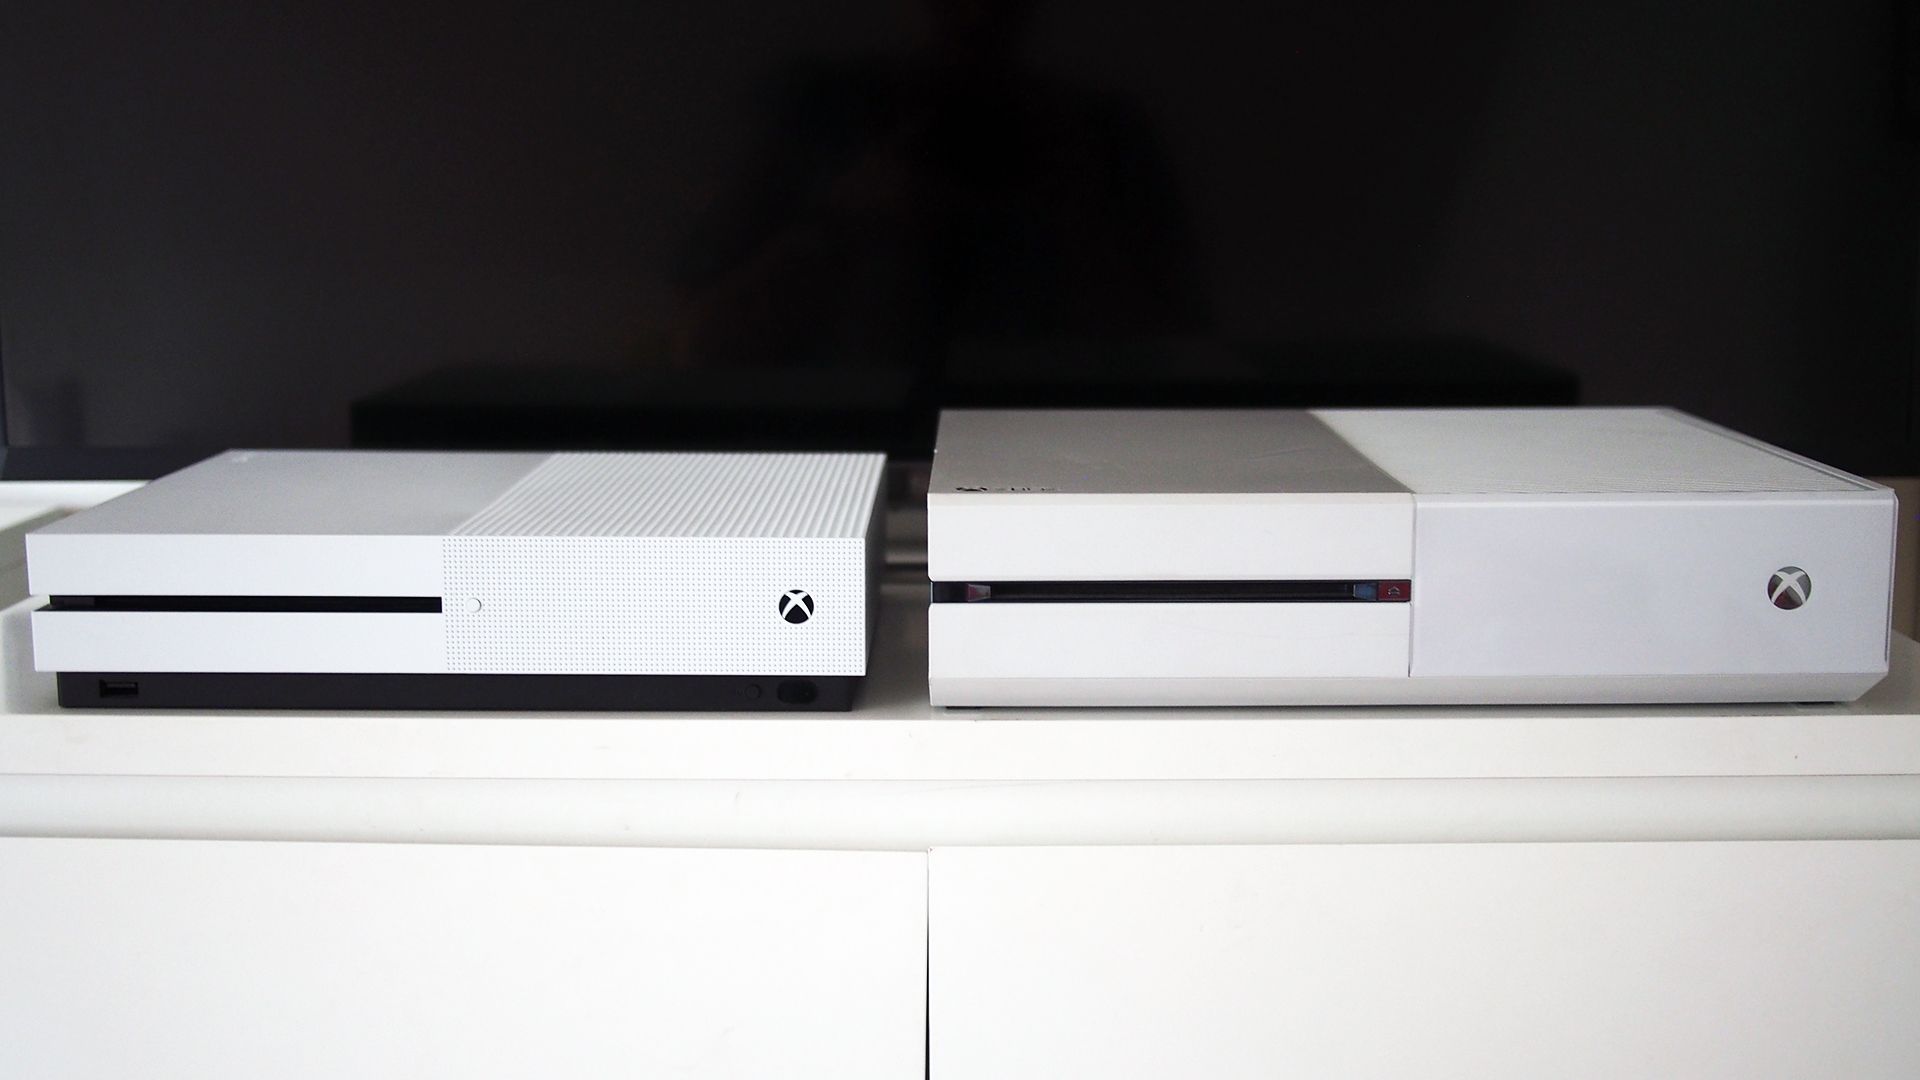 which is better xbox one or xbox one s